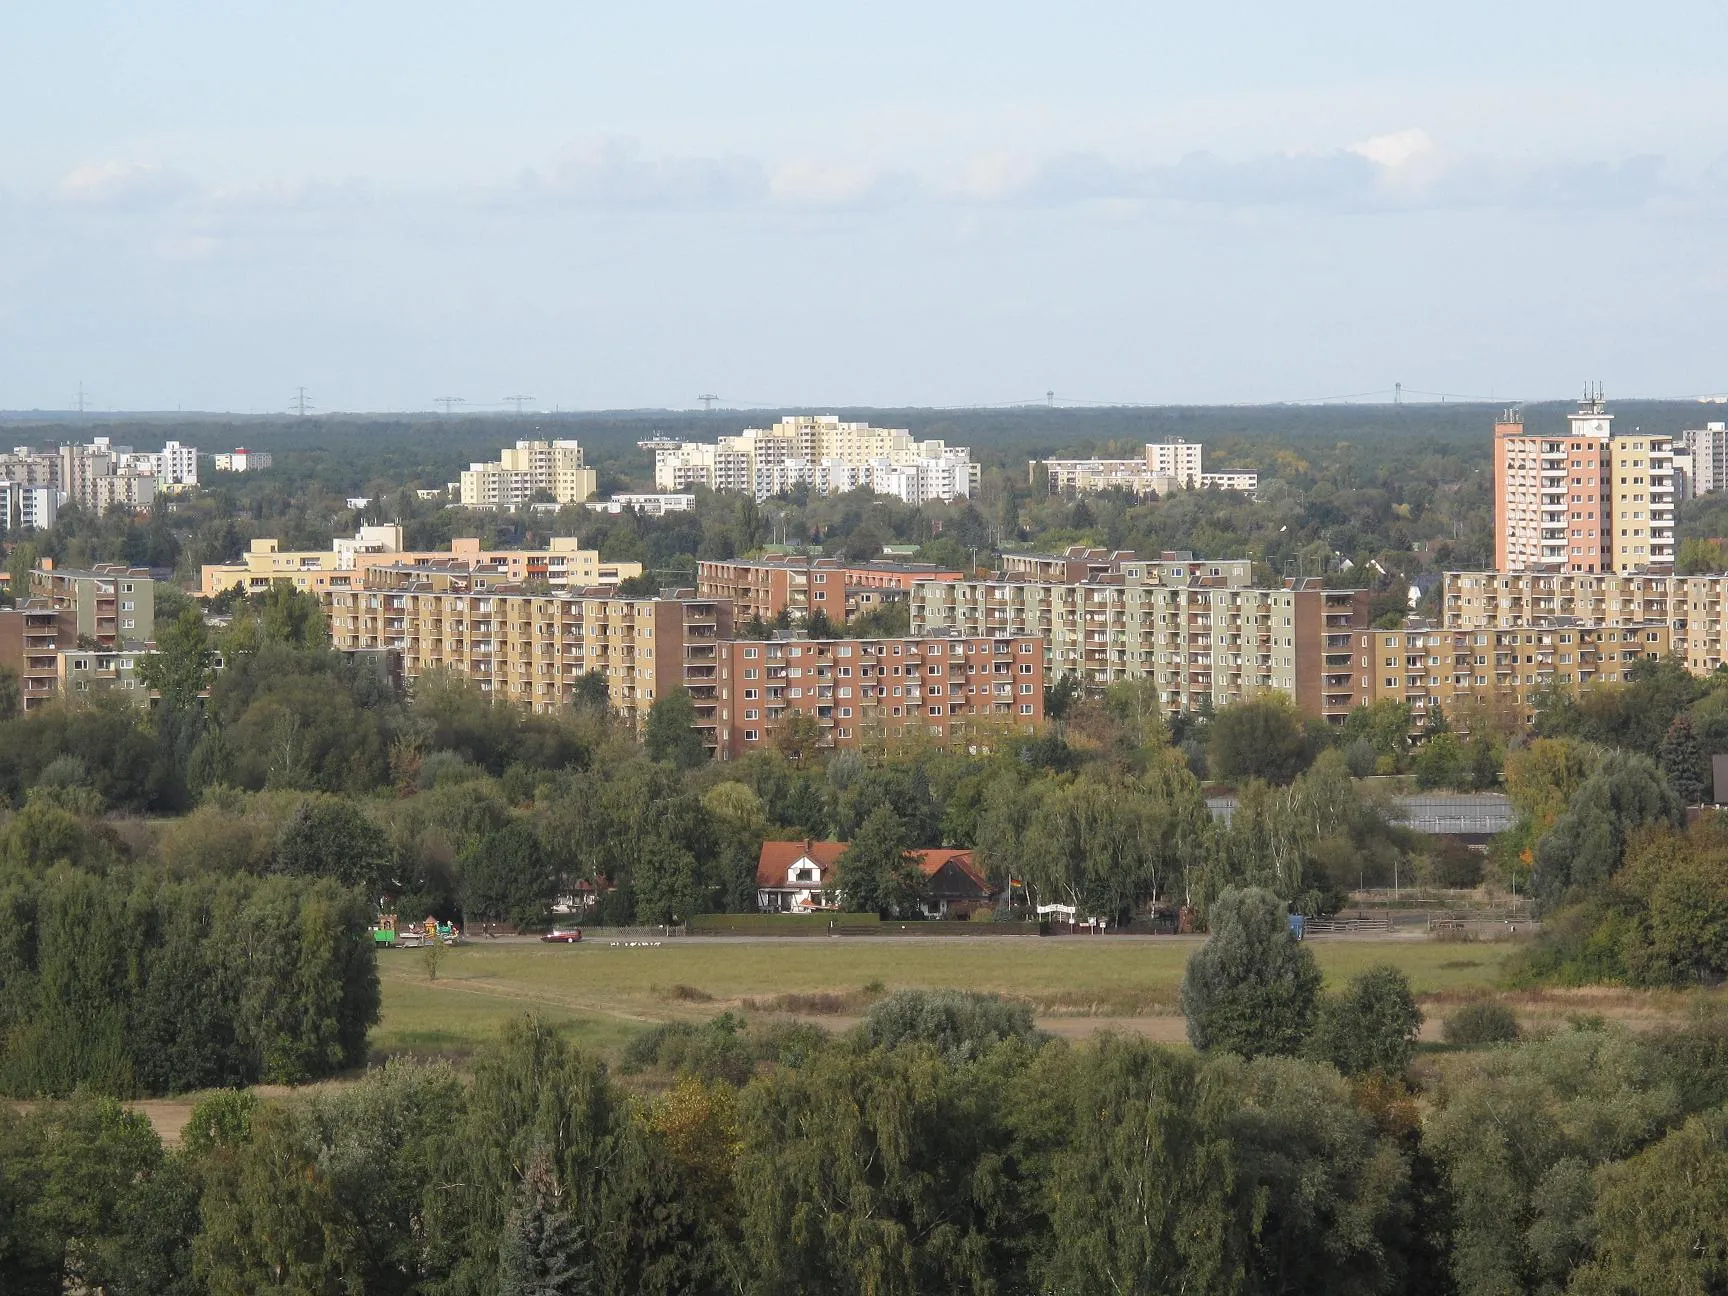 Image of Staaken